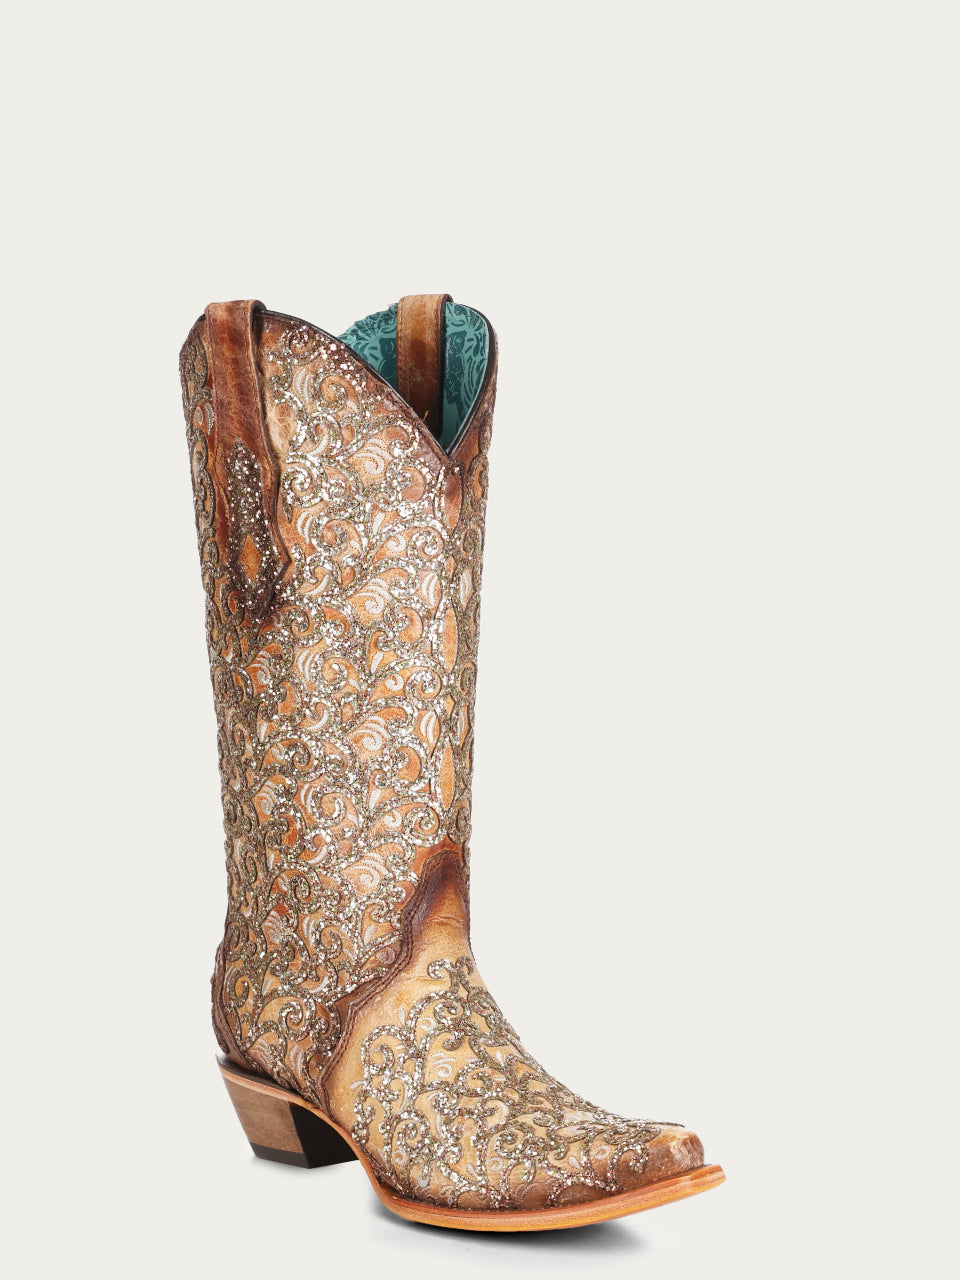 C4051 - WOMEN'S SAND GLITTER OVERLAY AND EMBROIDERY TRIAD SNIP TOE COWBOY BOOT